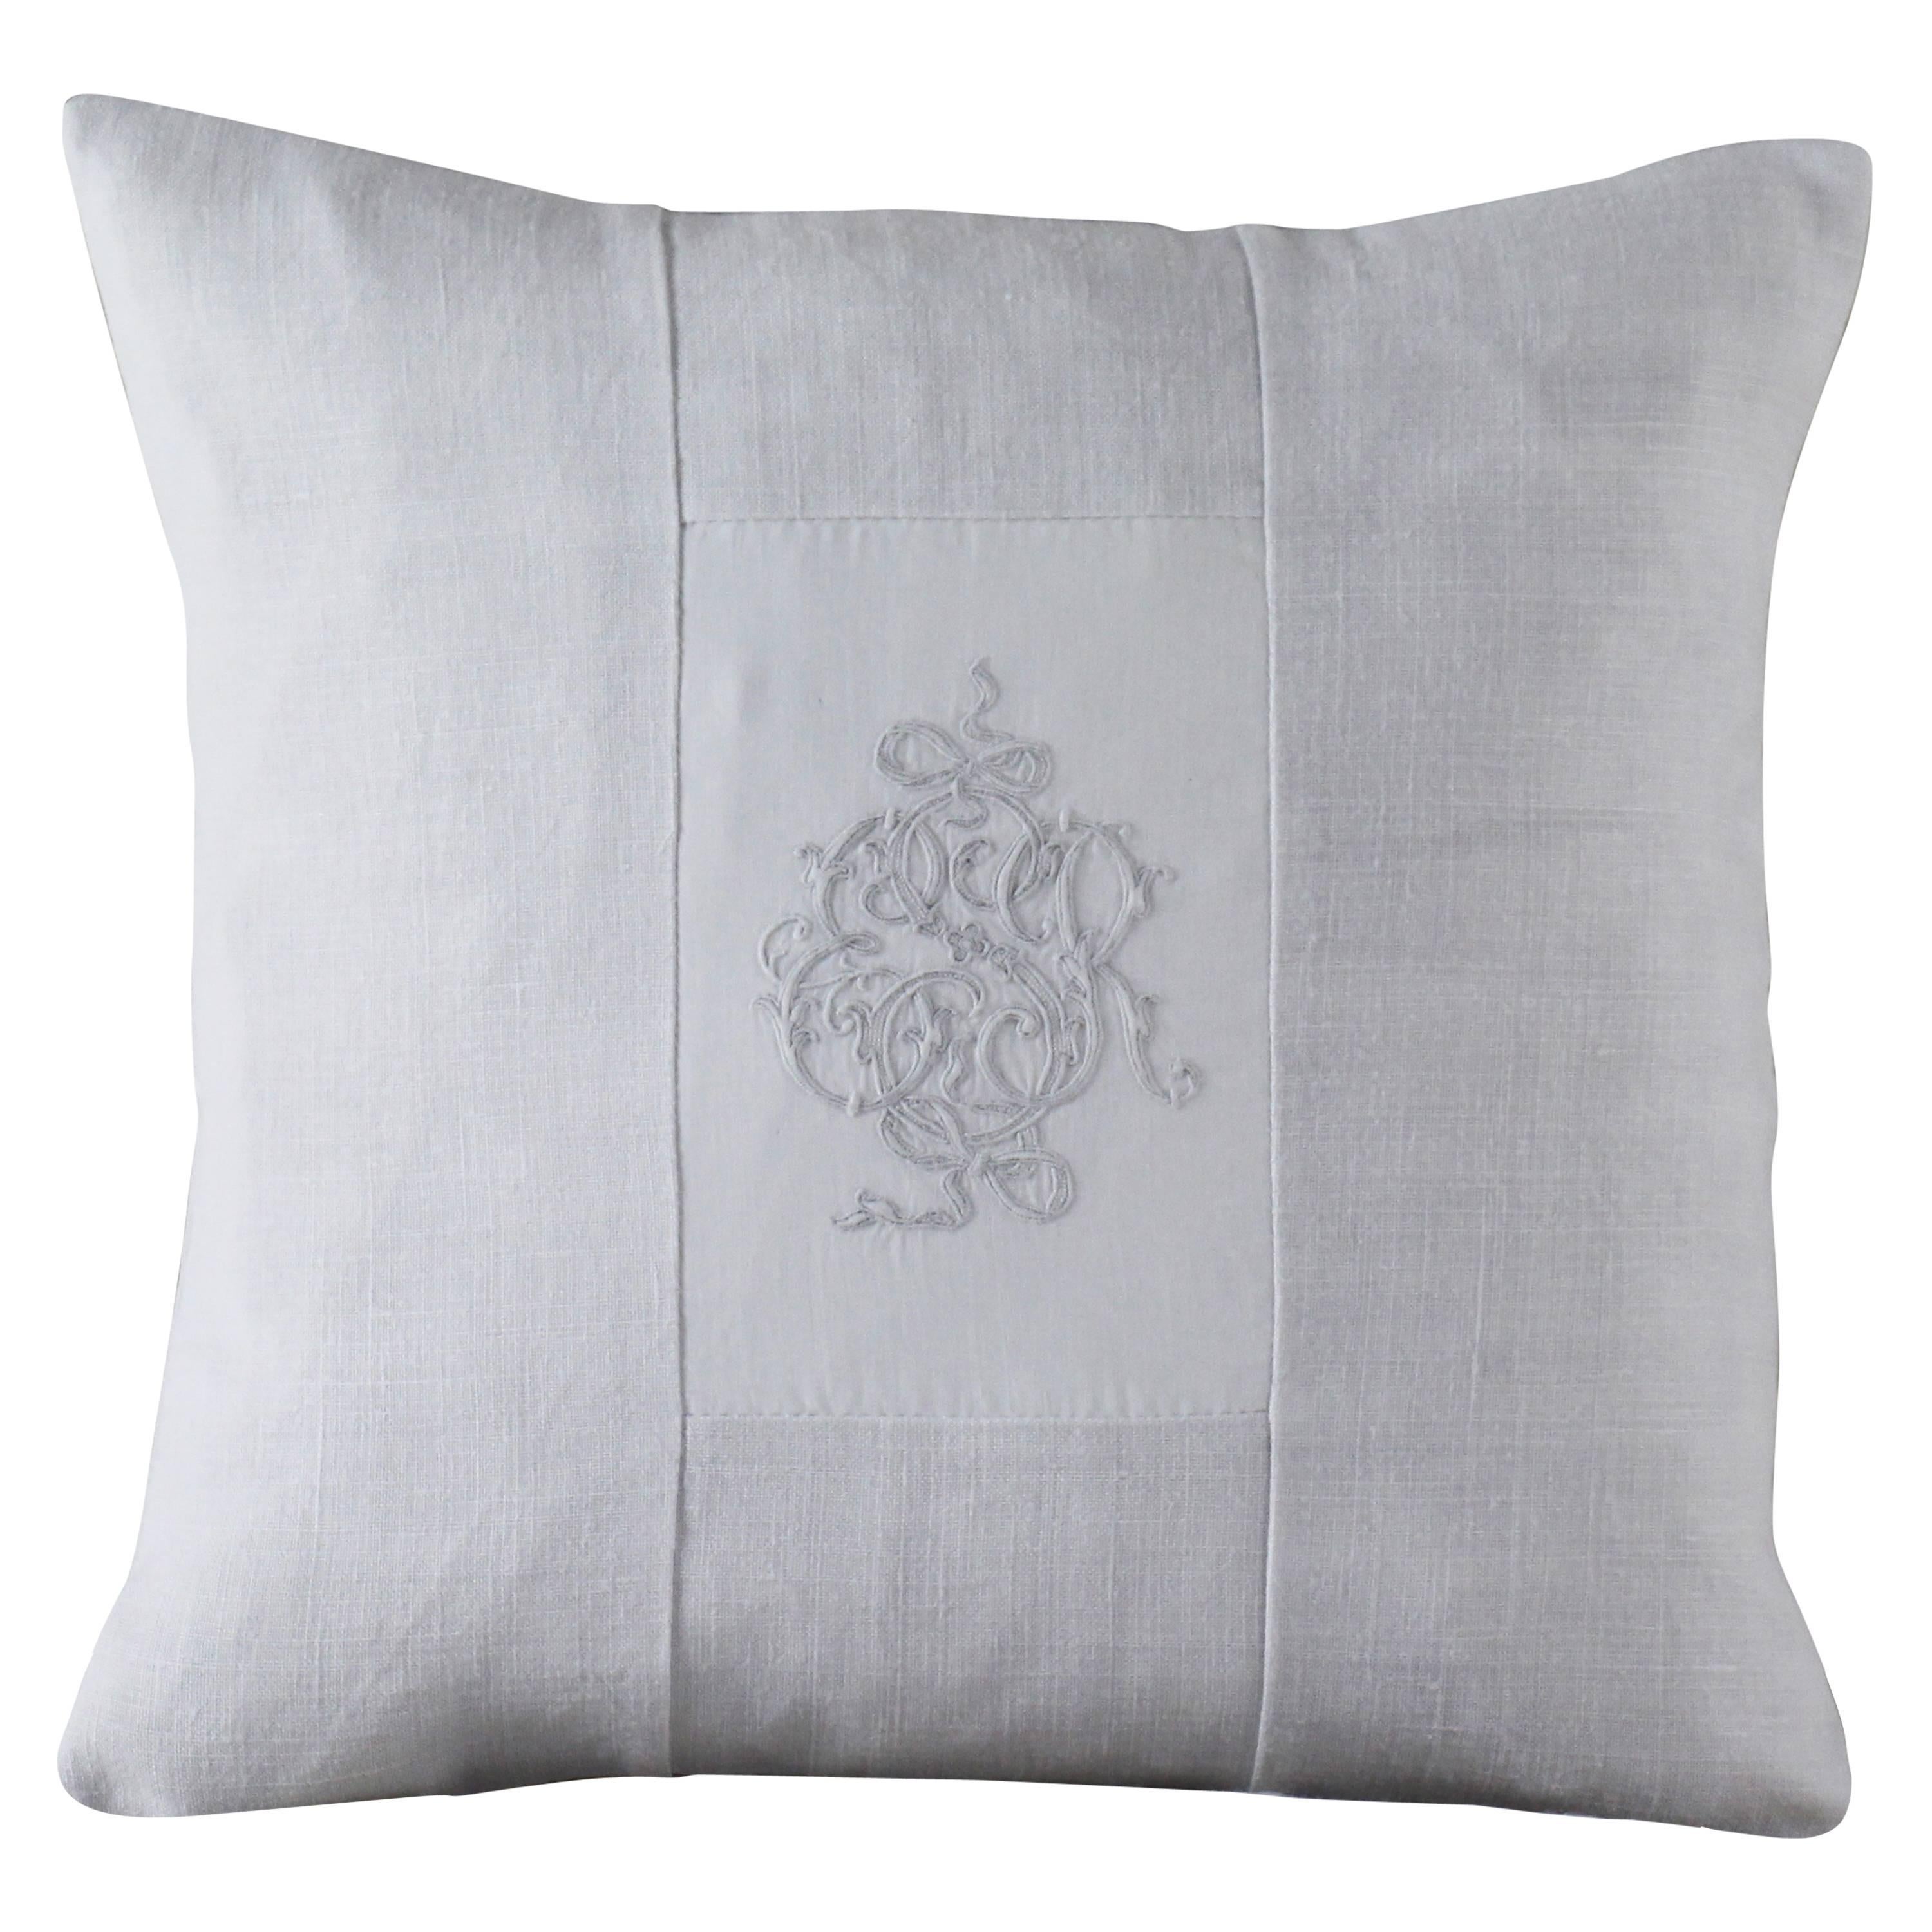 Small French Linen Monogramed Cushion 'ER' For Sale